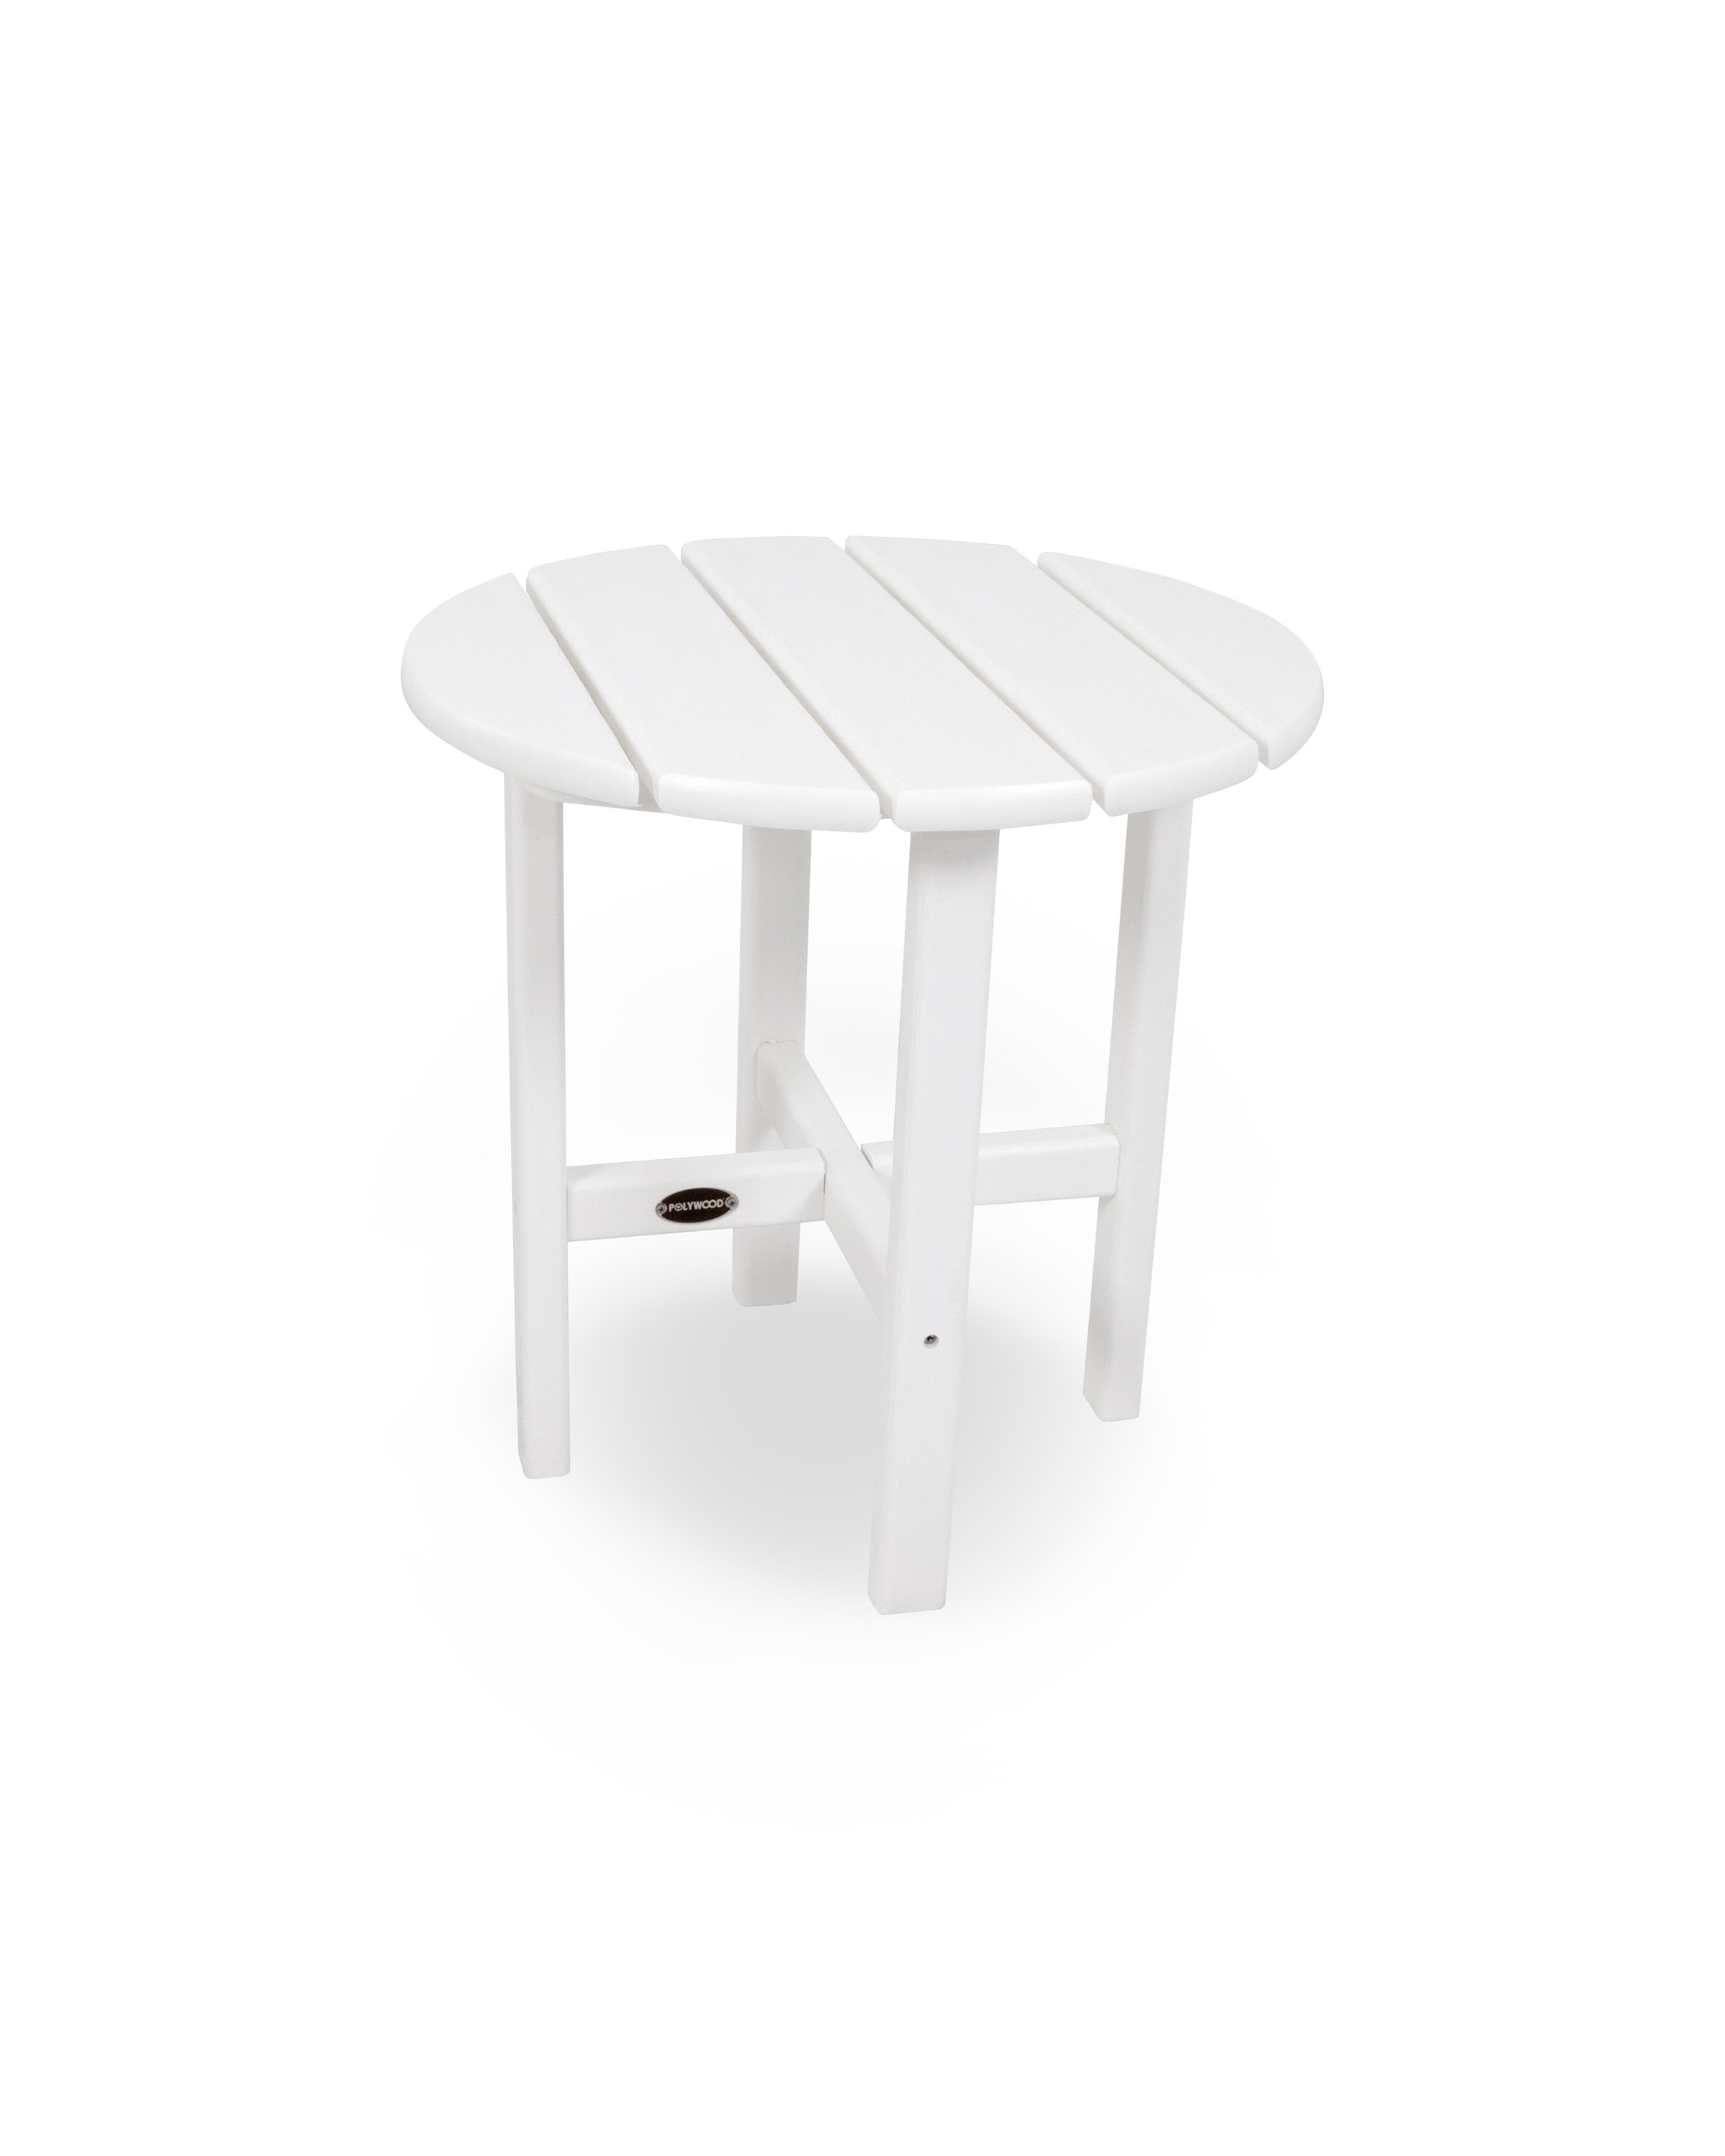 polywood side table reviews wicker patio accent retro dining chairs placemats and napkins tall pub bar height tempered glass matching lamps antique white sofa metal with wood top